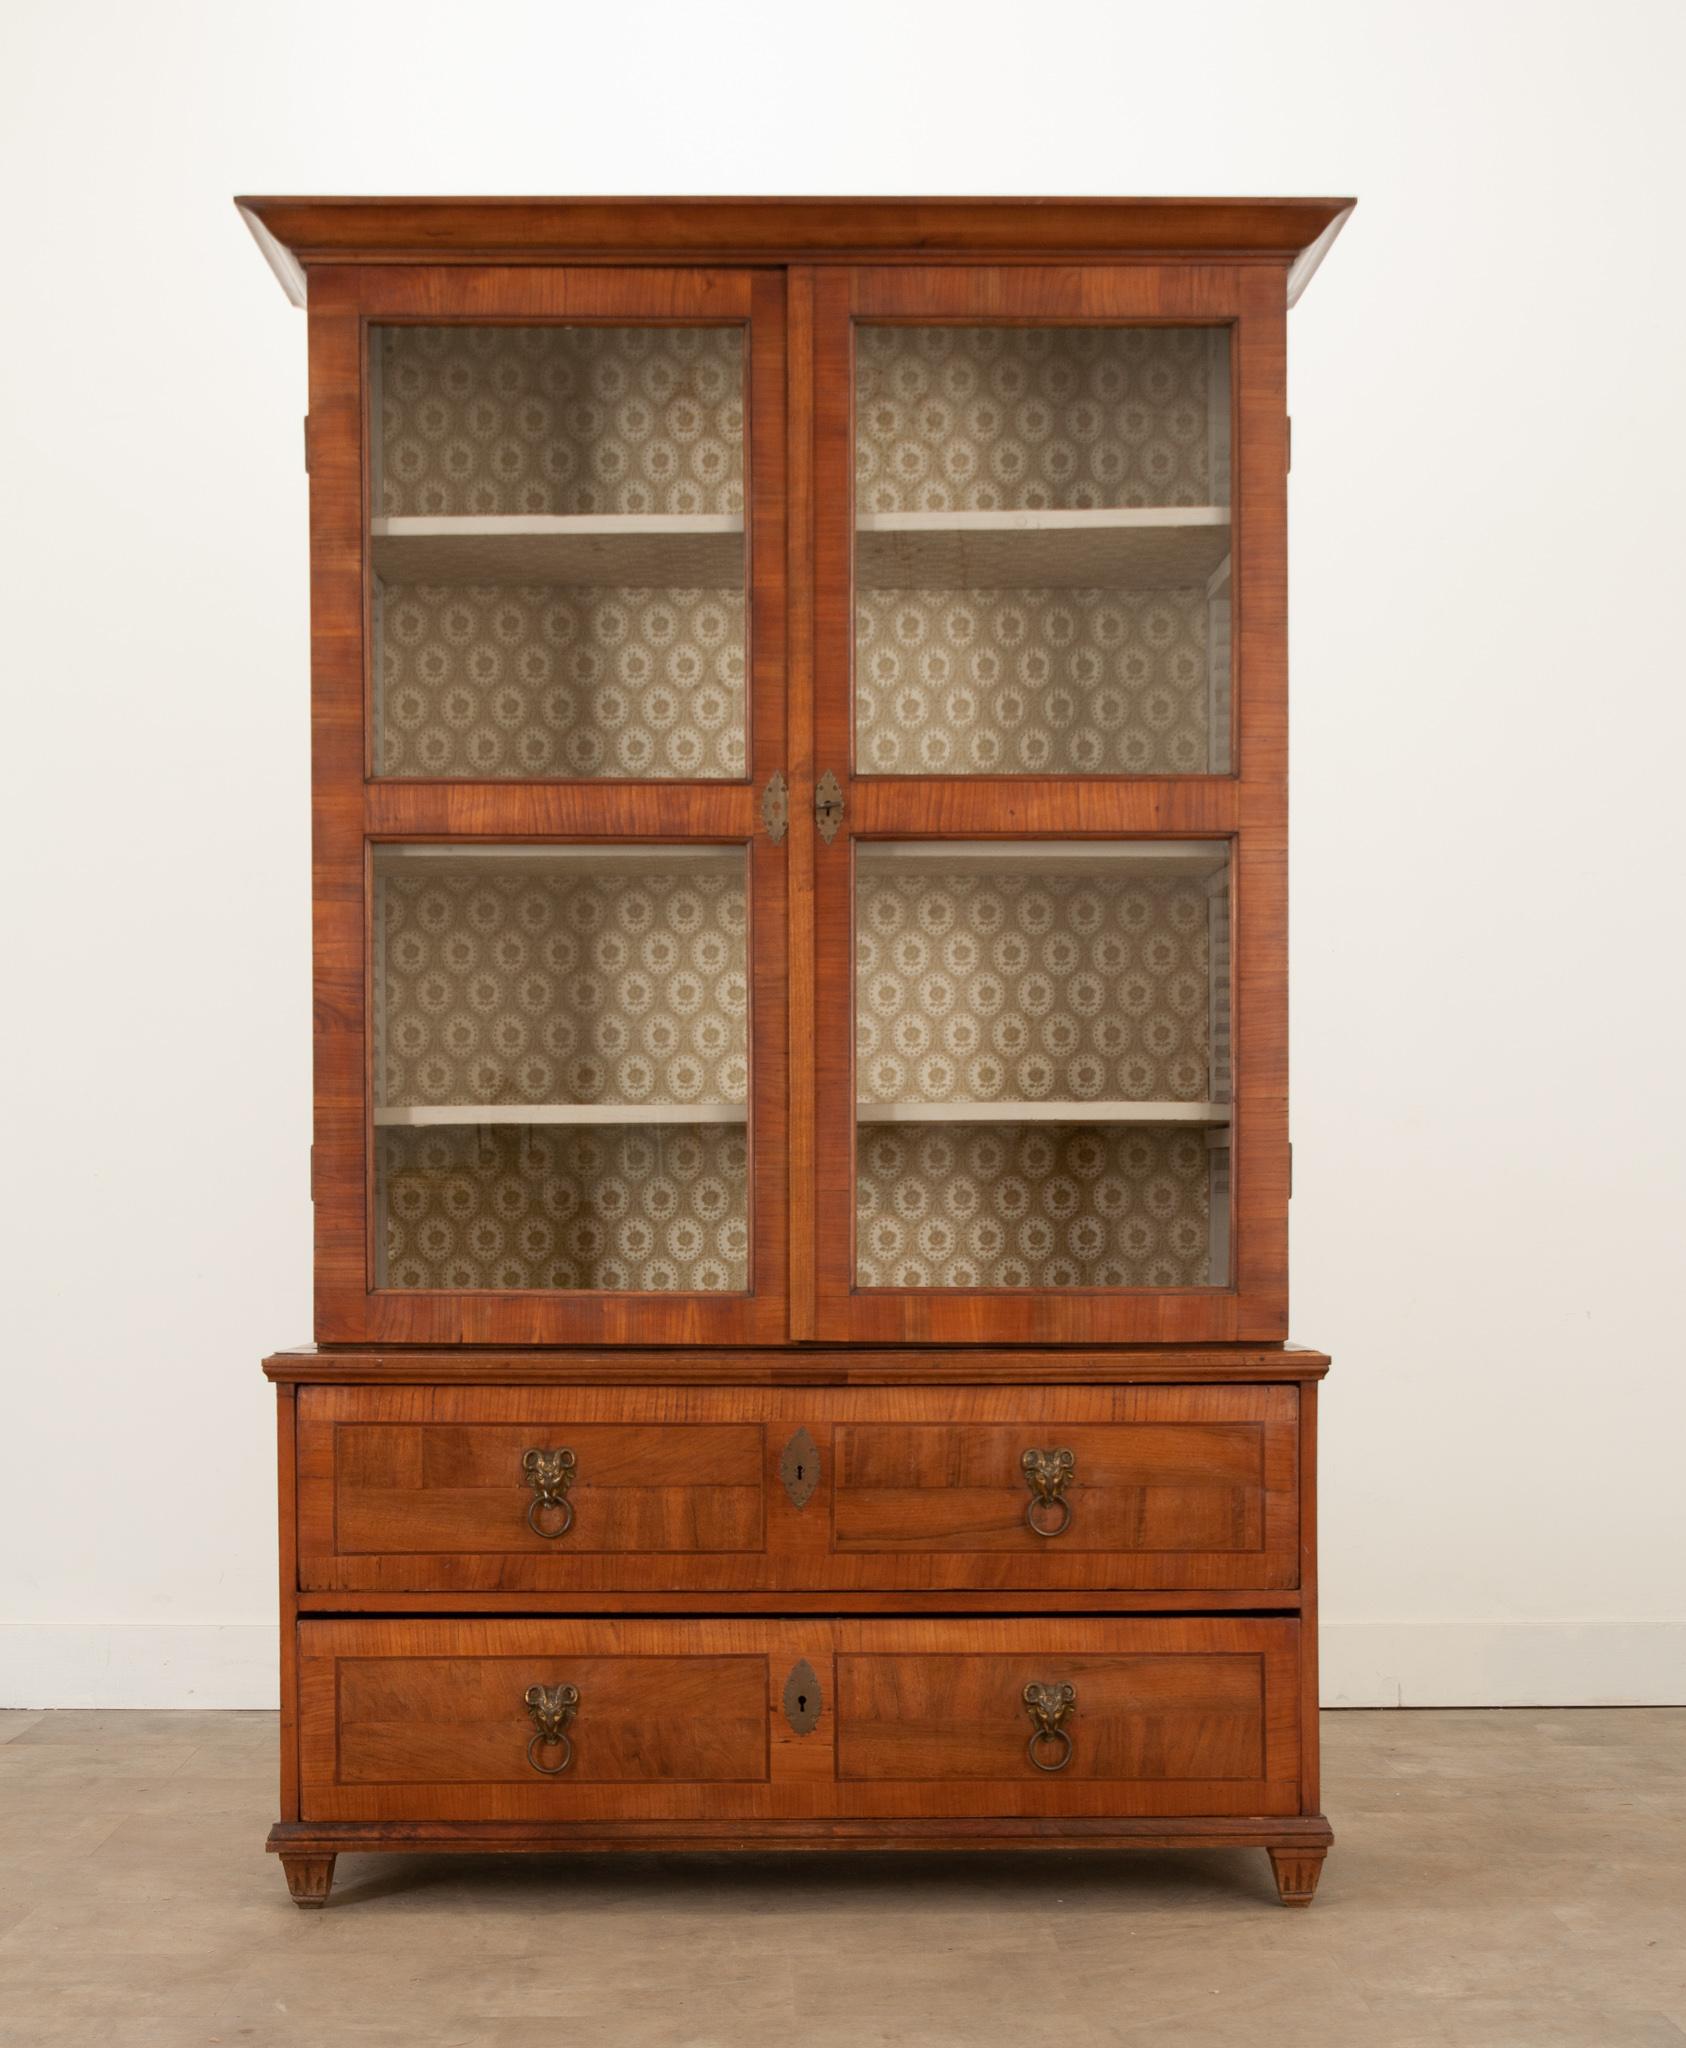 A unique and interesting mahogany bibliotheque from 19th Century France. The bookcase is split into two bodies: a glass-front upper and a lower bank of drawers. The upper body retains its original glass and is accessed using its lock and key. The